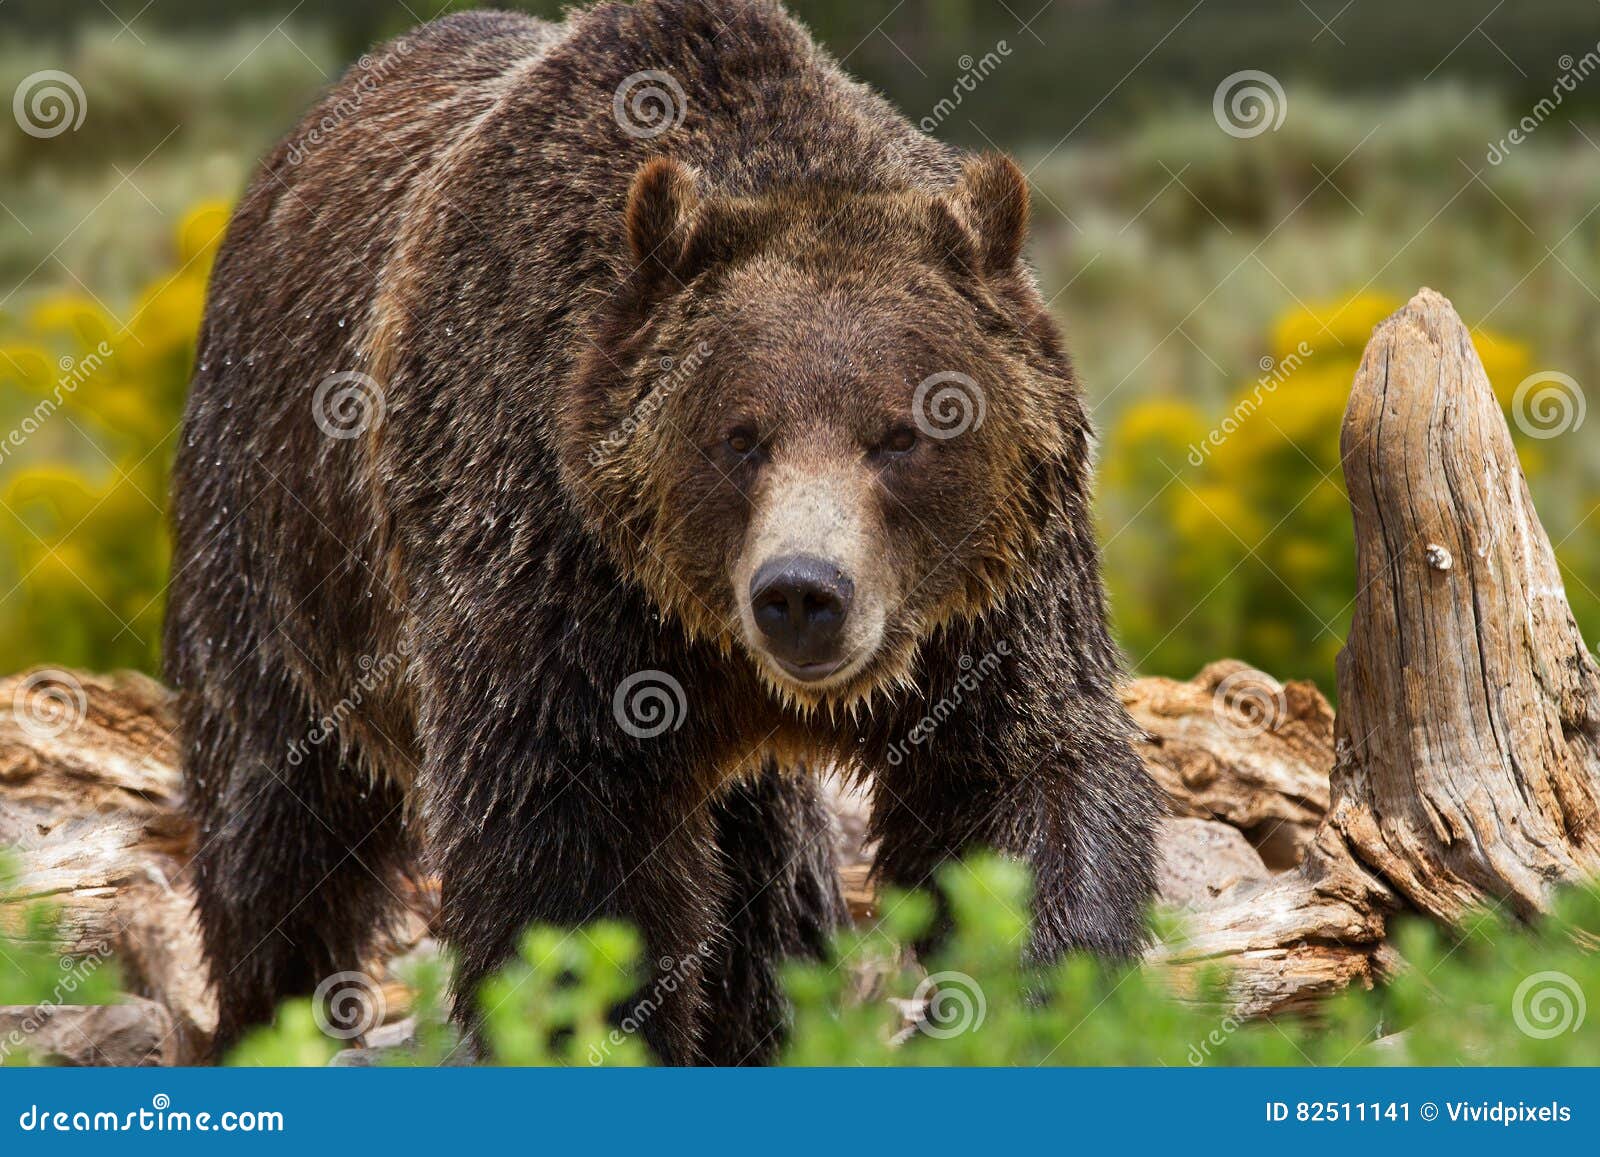 grizzly bear in yellowstone national park